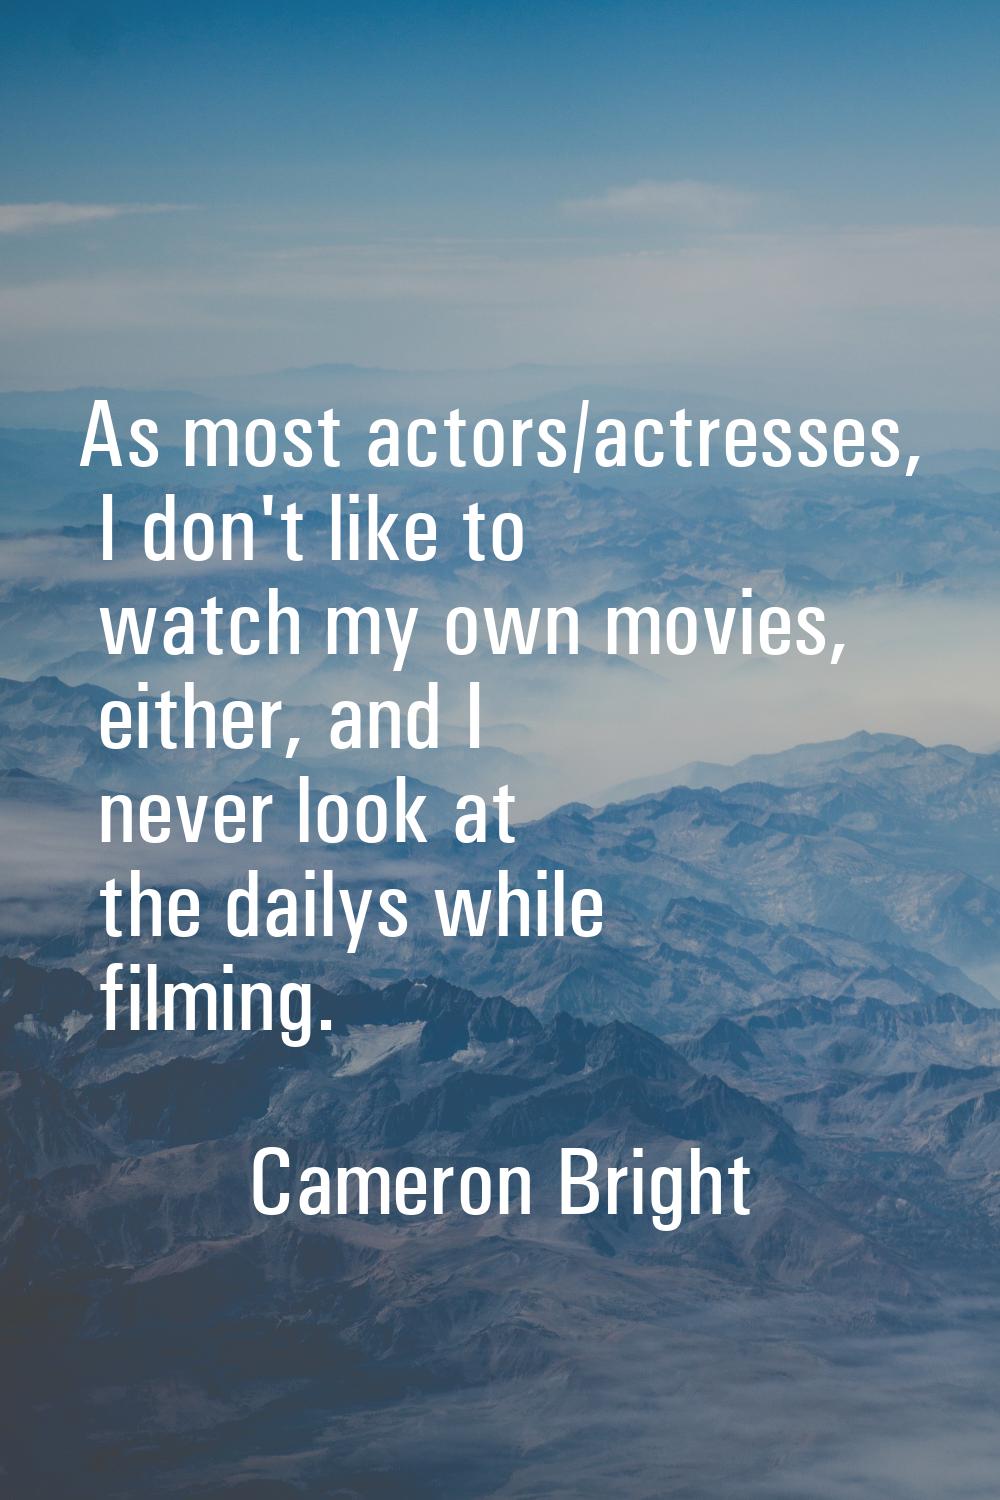 As most actors/actresses, I don't like to watch my own movies, either, and I never look at the dail